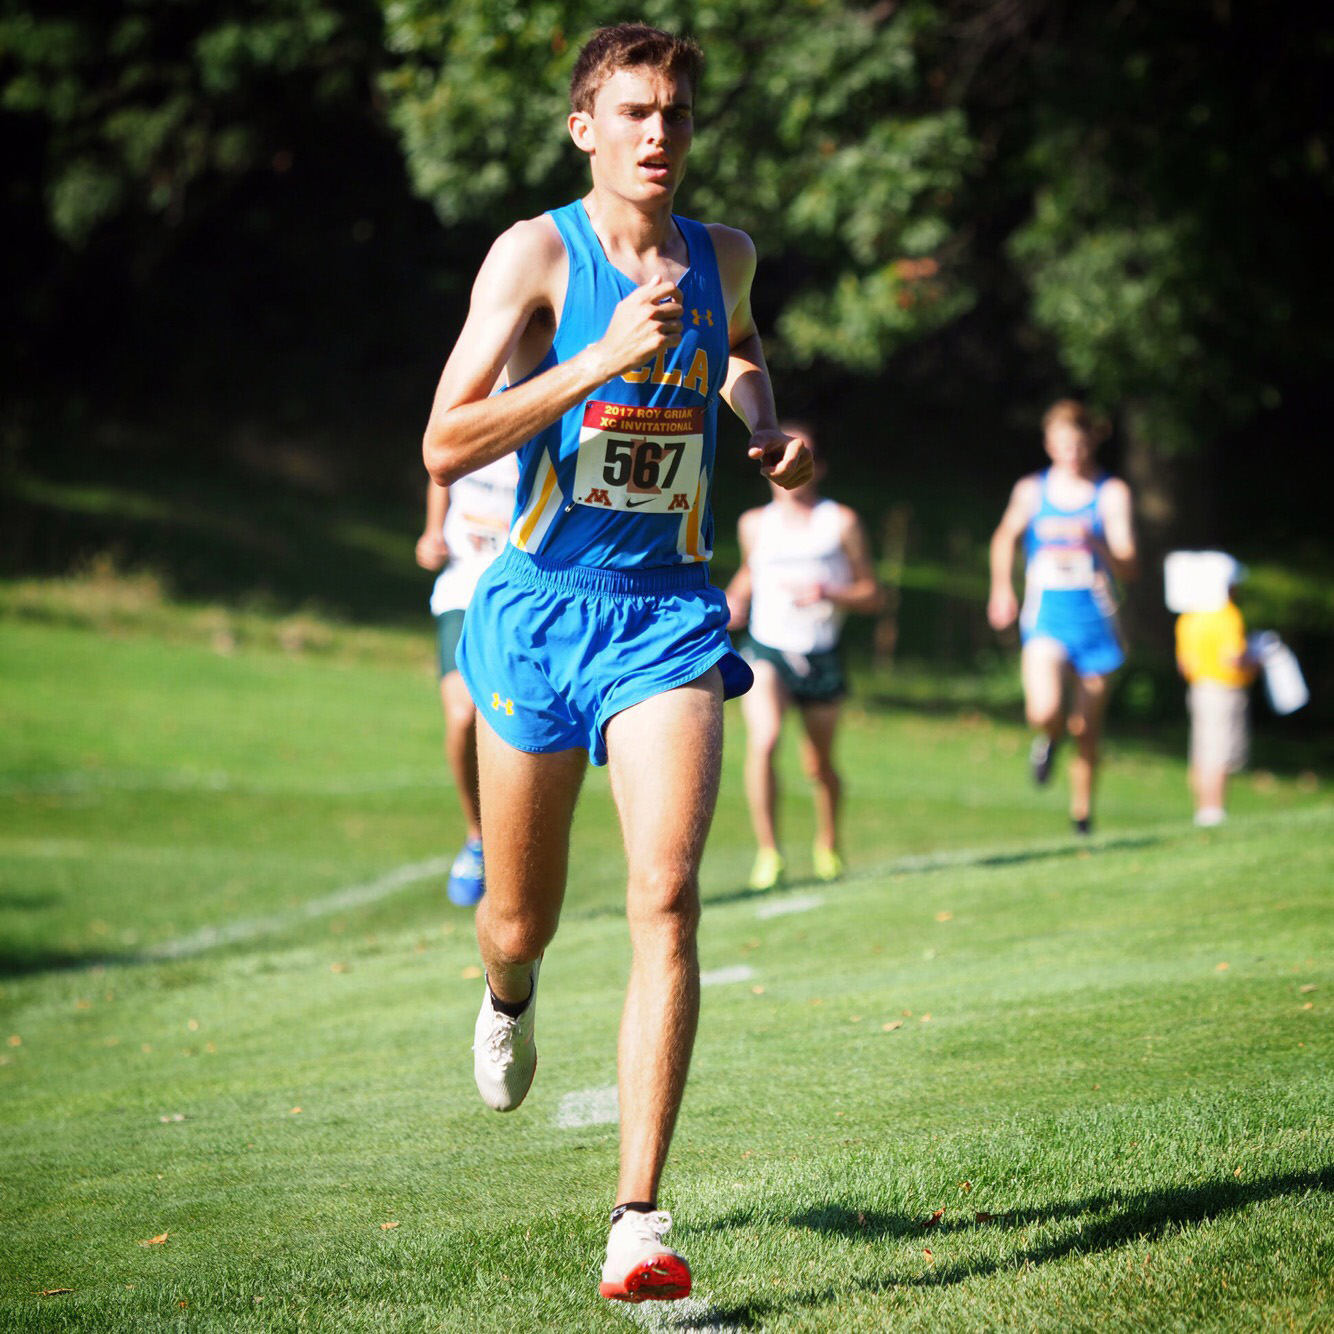 UCLA cross country sending fresh, eager athletes to race in